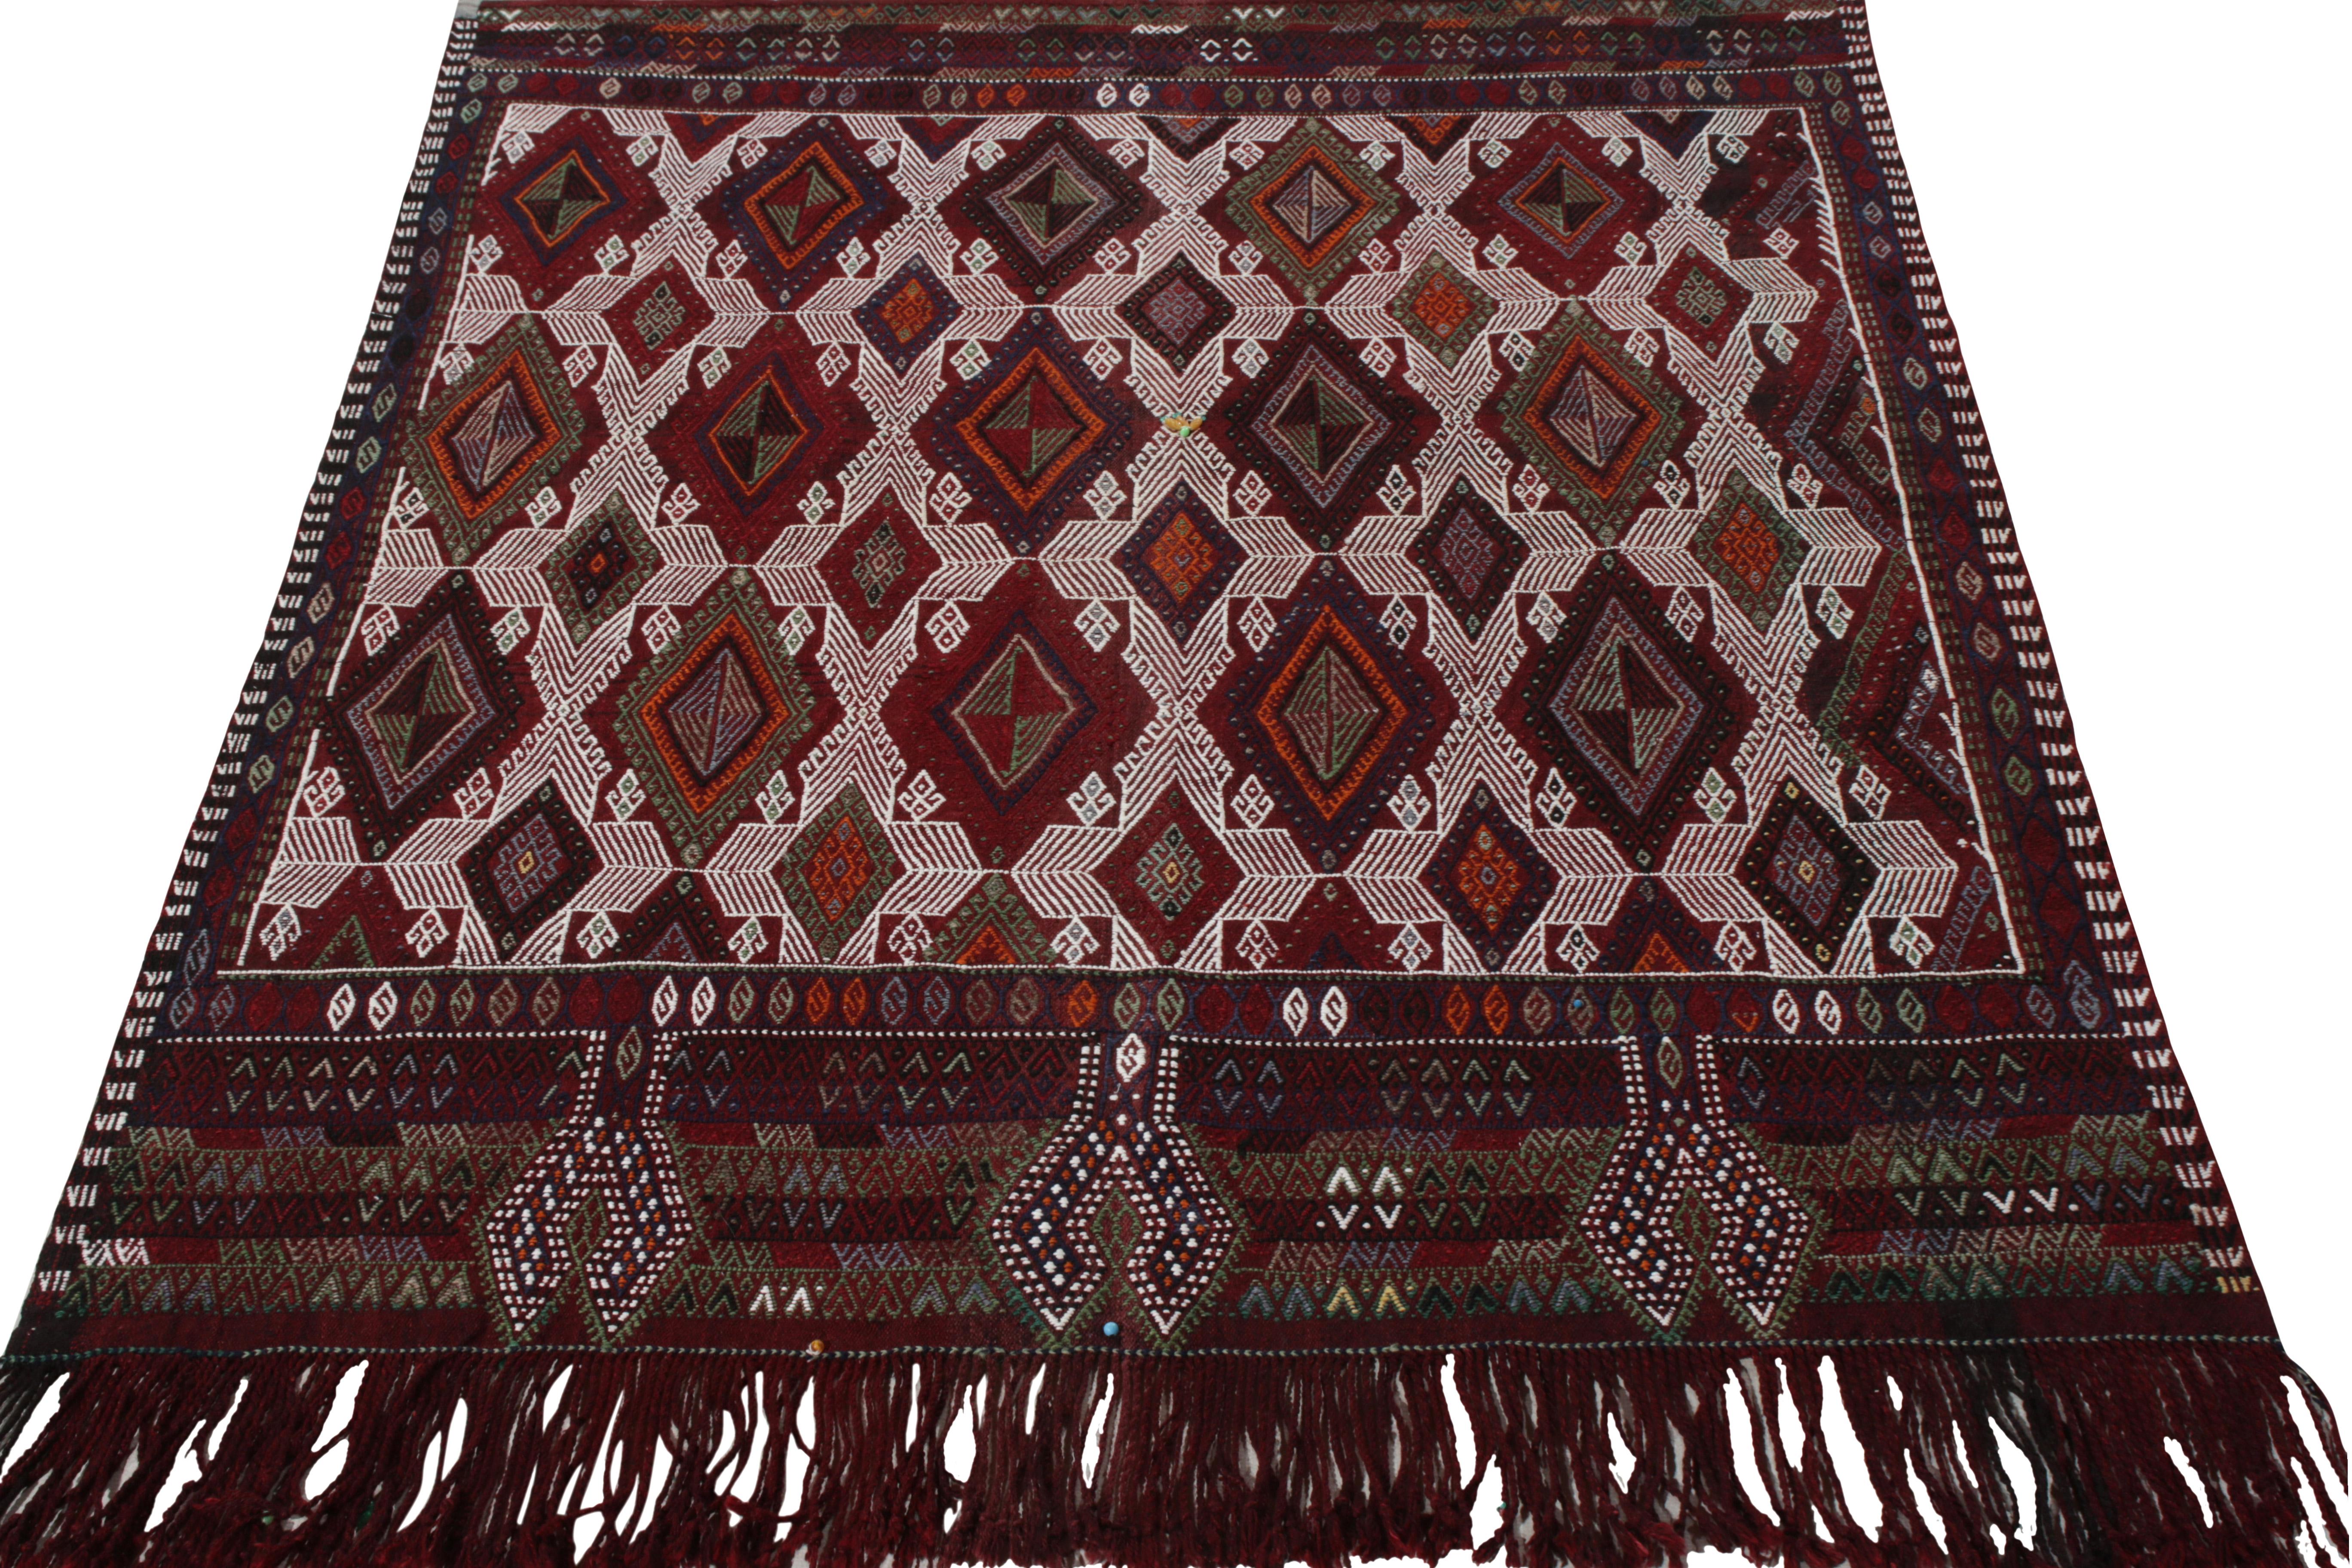 Dexterously woven in wool circa 1950-1960, this 1950s vintage Kilim piece hails from Rug & Kilim’s iconic Kilim & Flat Weave Collection. Covering a 4x5 near-square scale of Turkish tribal sensibilities, the rug features a symmetric geometric pattern